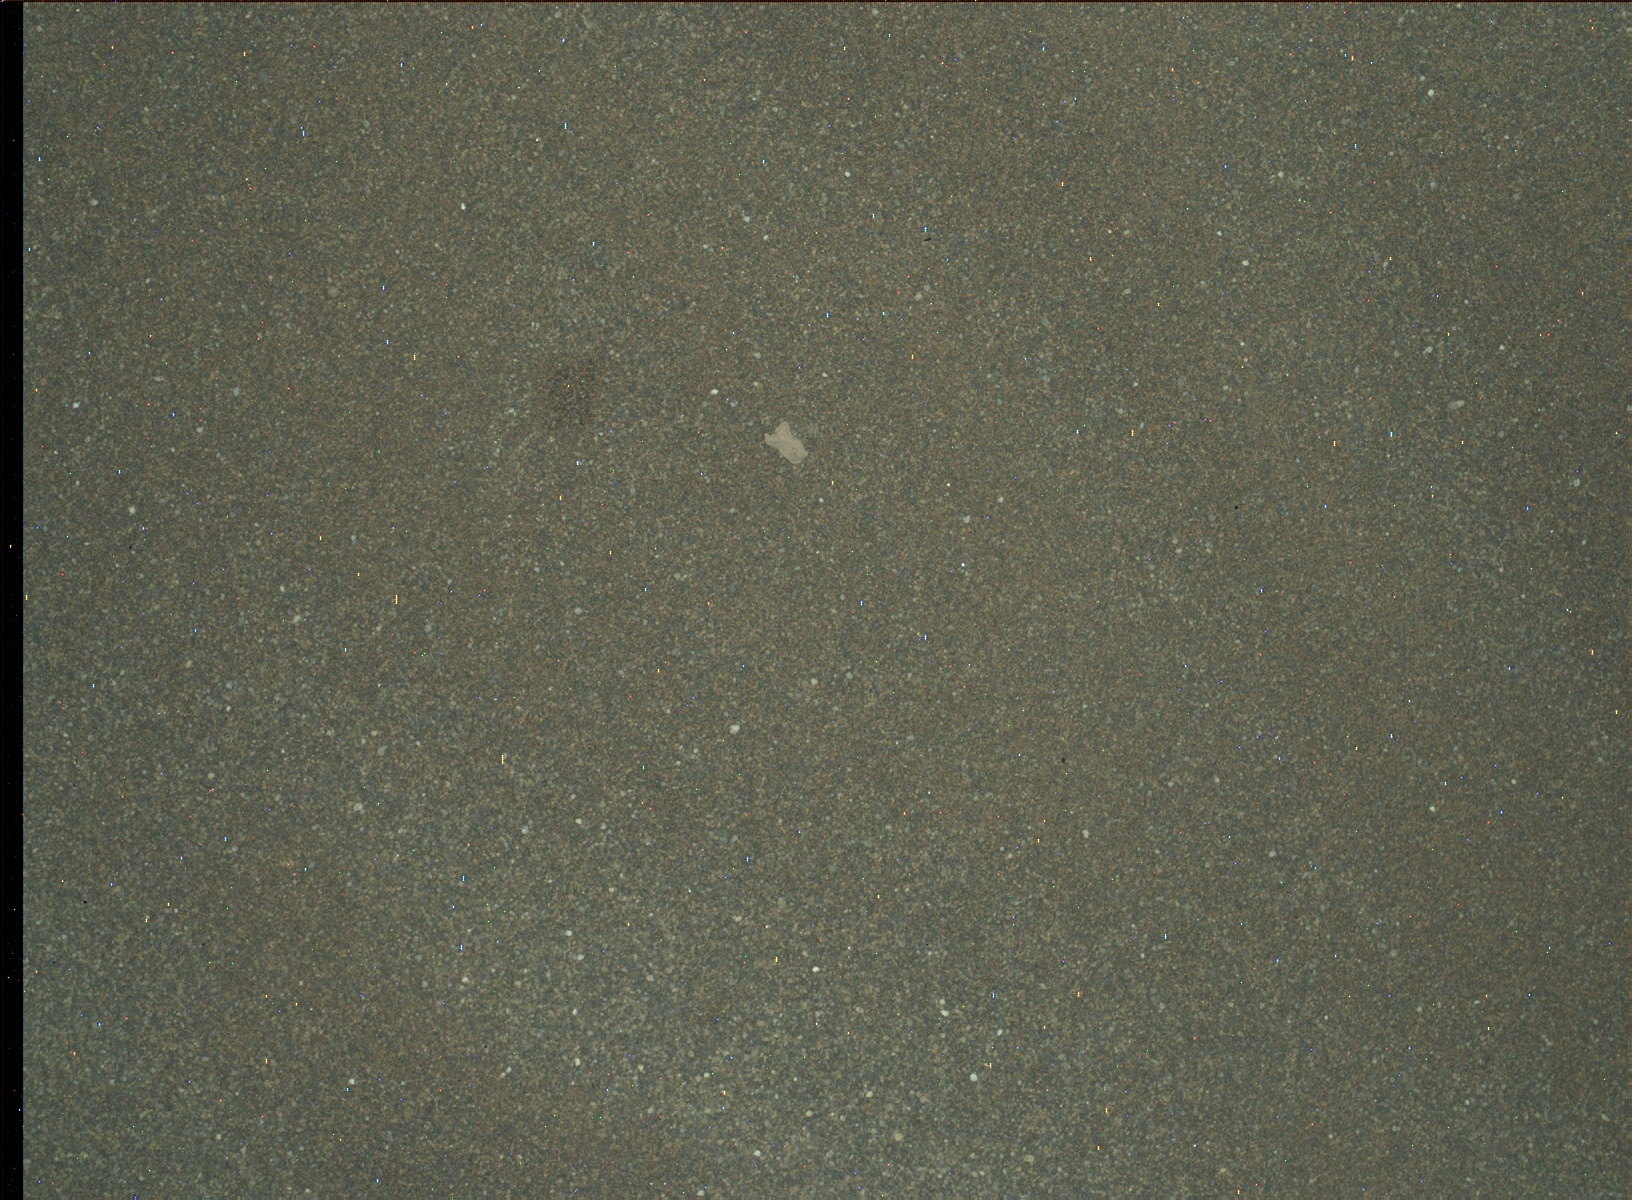 Nasa's Mars rover Curiosity acquired this image using its Mars Hand Lens Imager (MAHLI) on Sol 1184